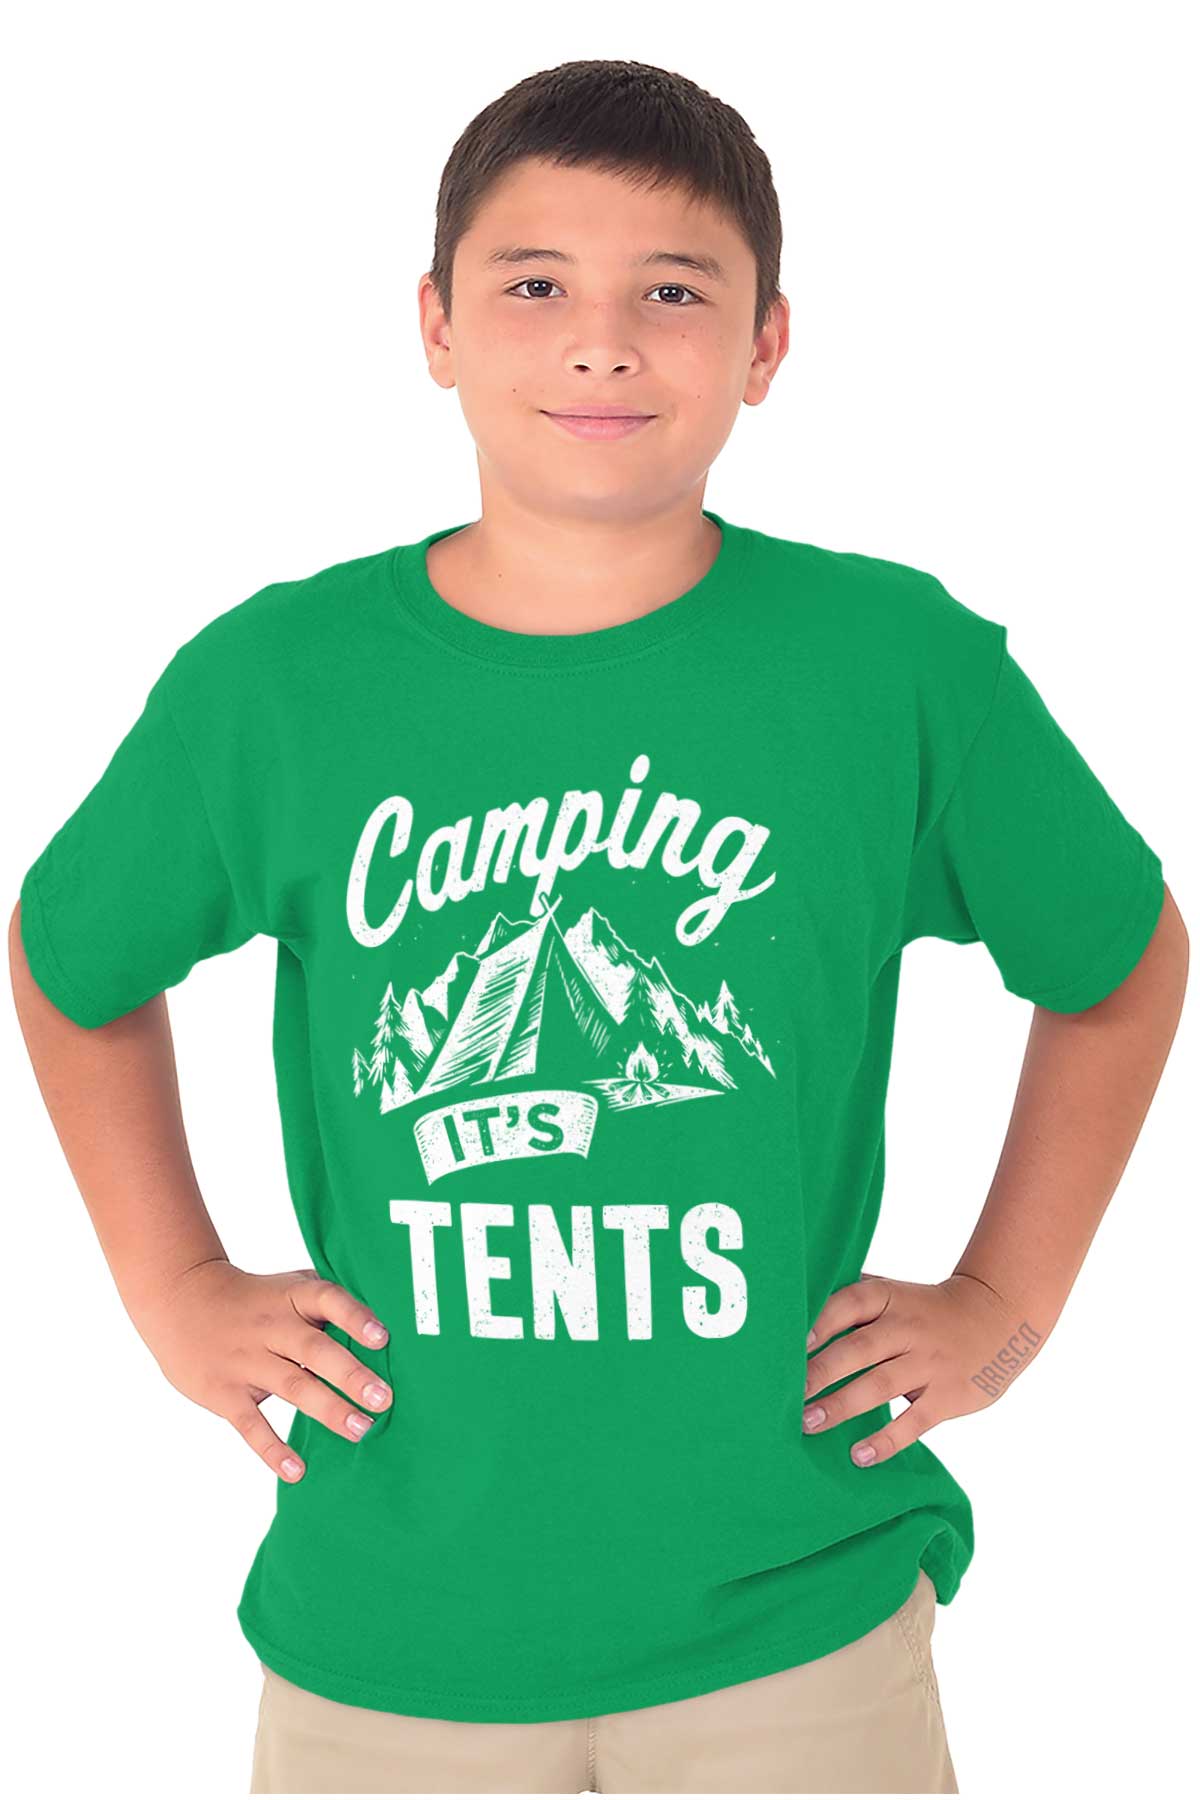 Camping Its In Tents Nature Outdoors RV Unisex Kids Youth Crew T Shirts ...